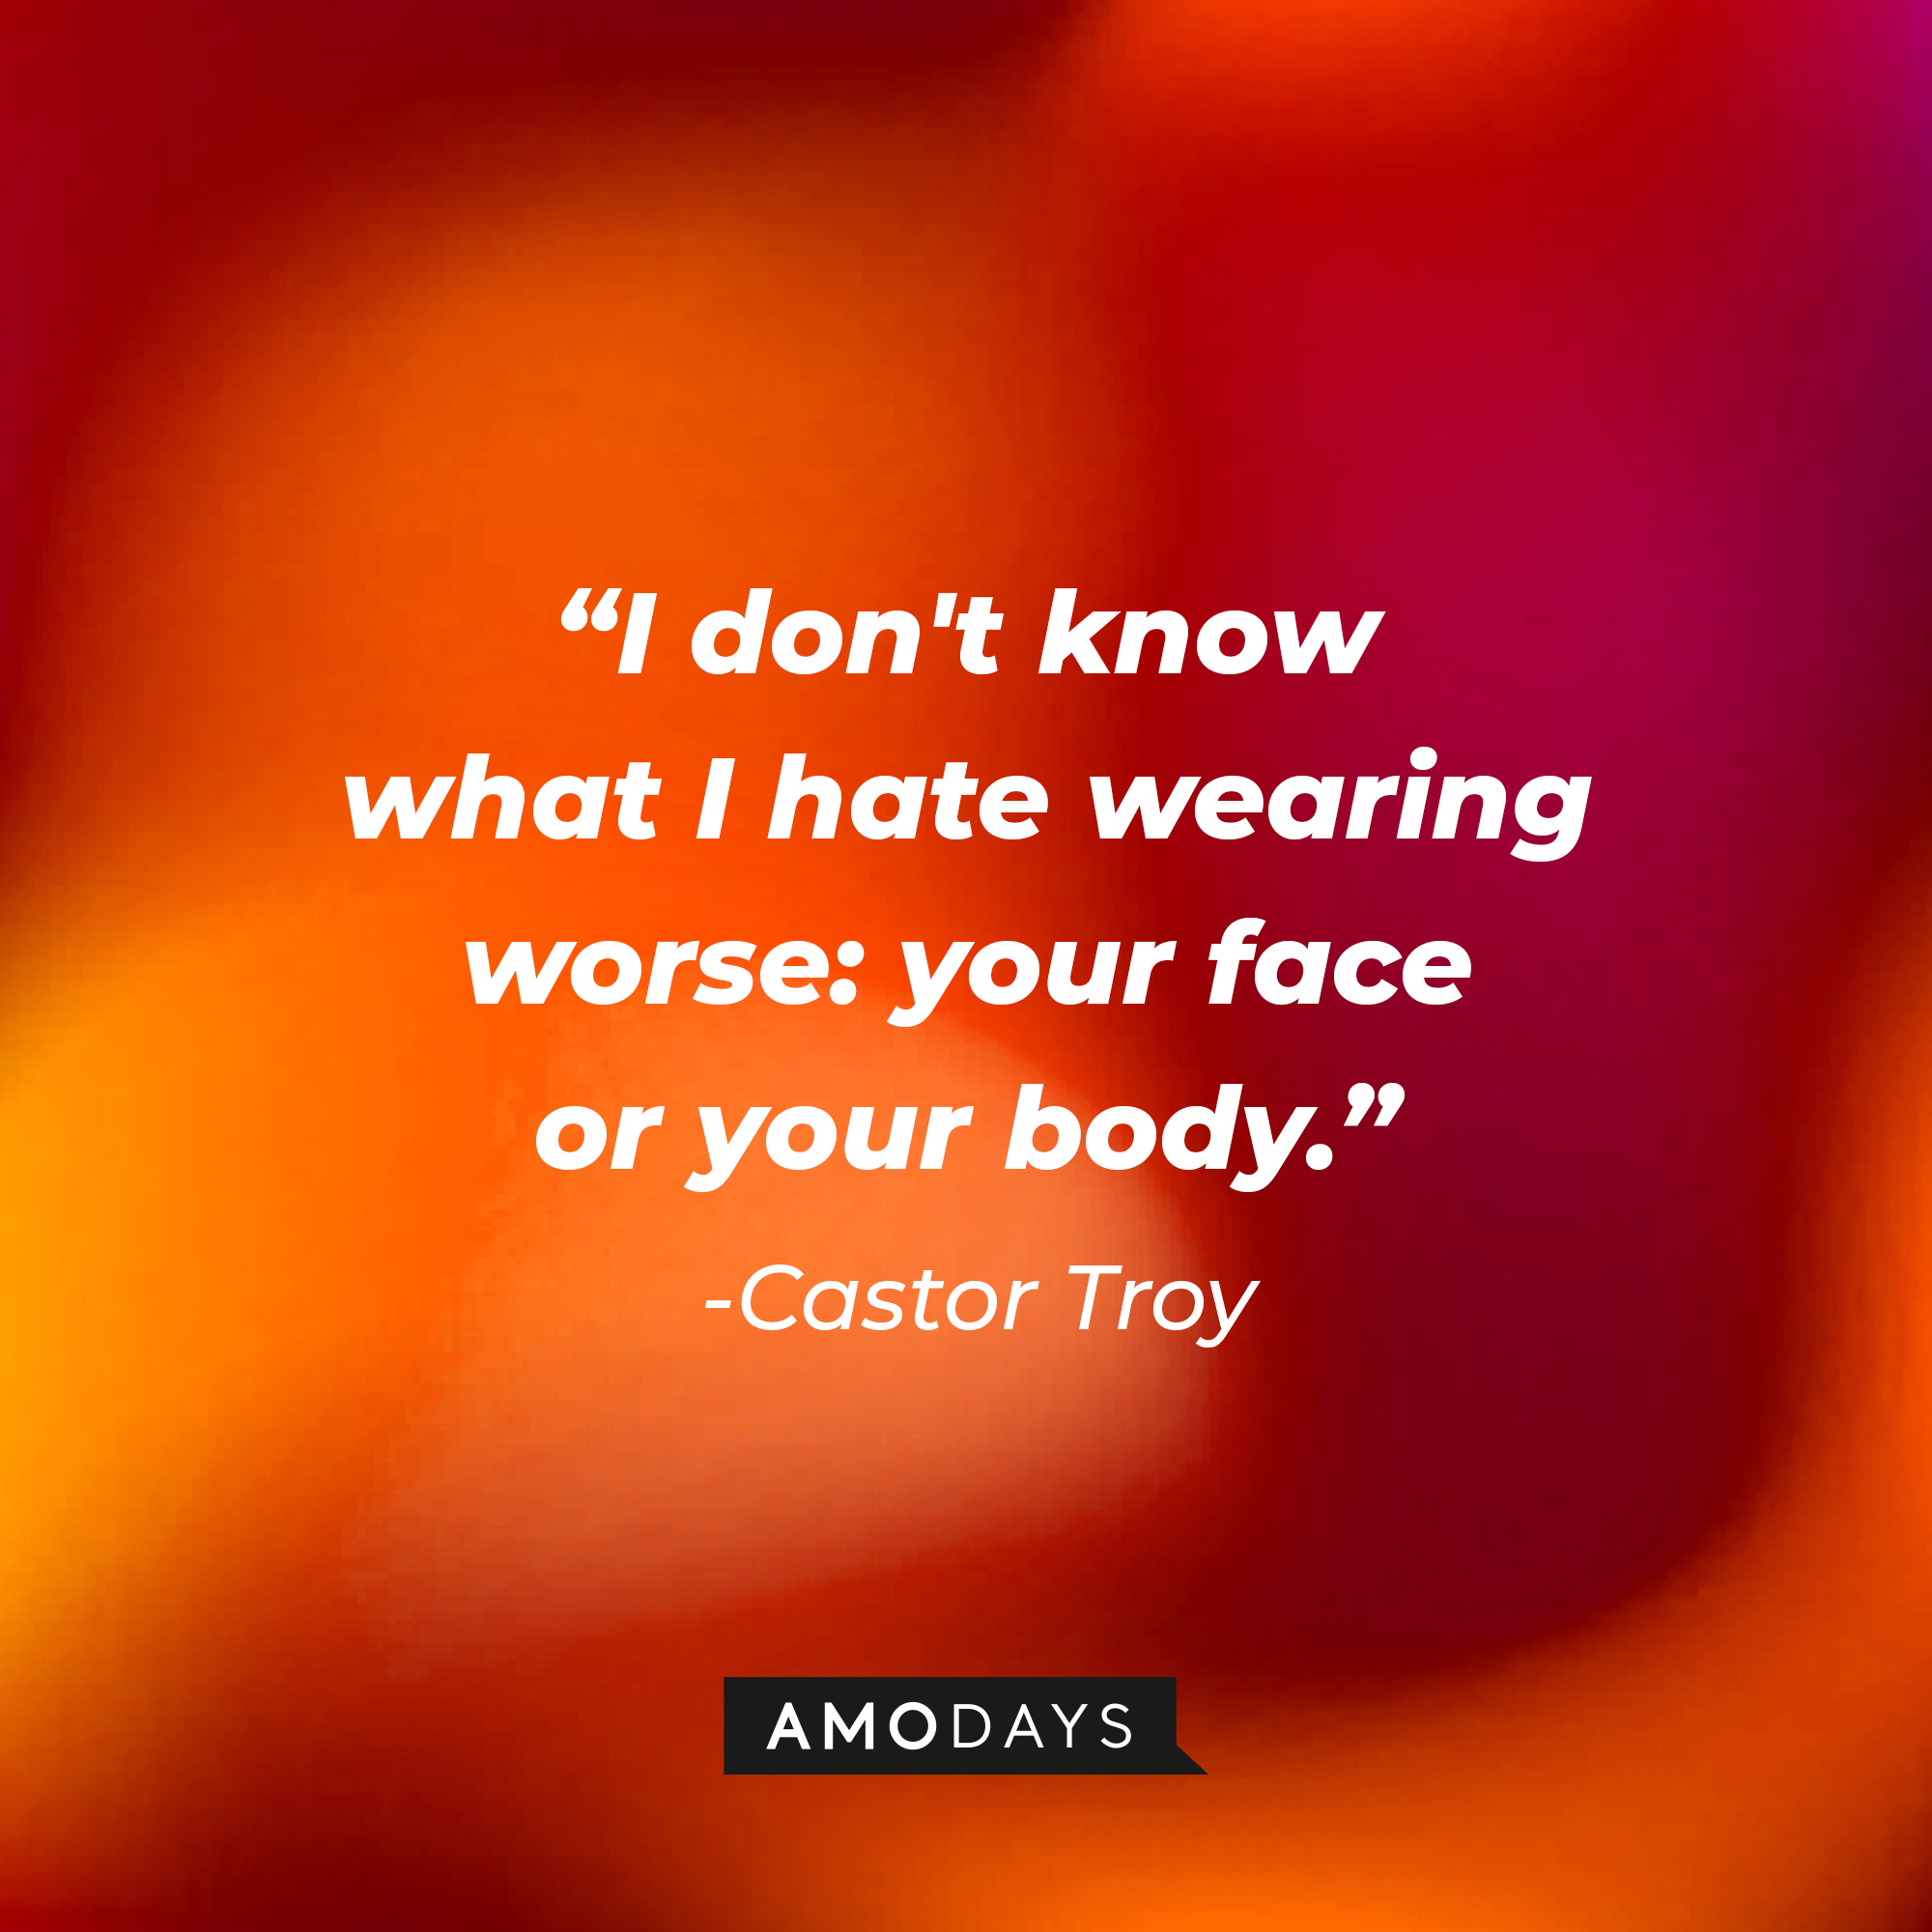 Castor Troy's quote: "I don't know what I hate wearing worse: your face or your body.” : Source: Amodays